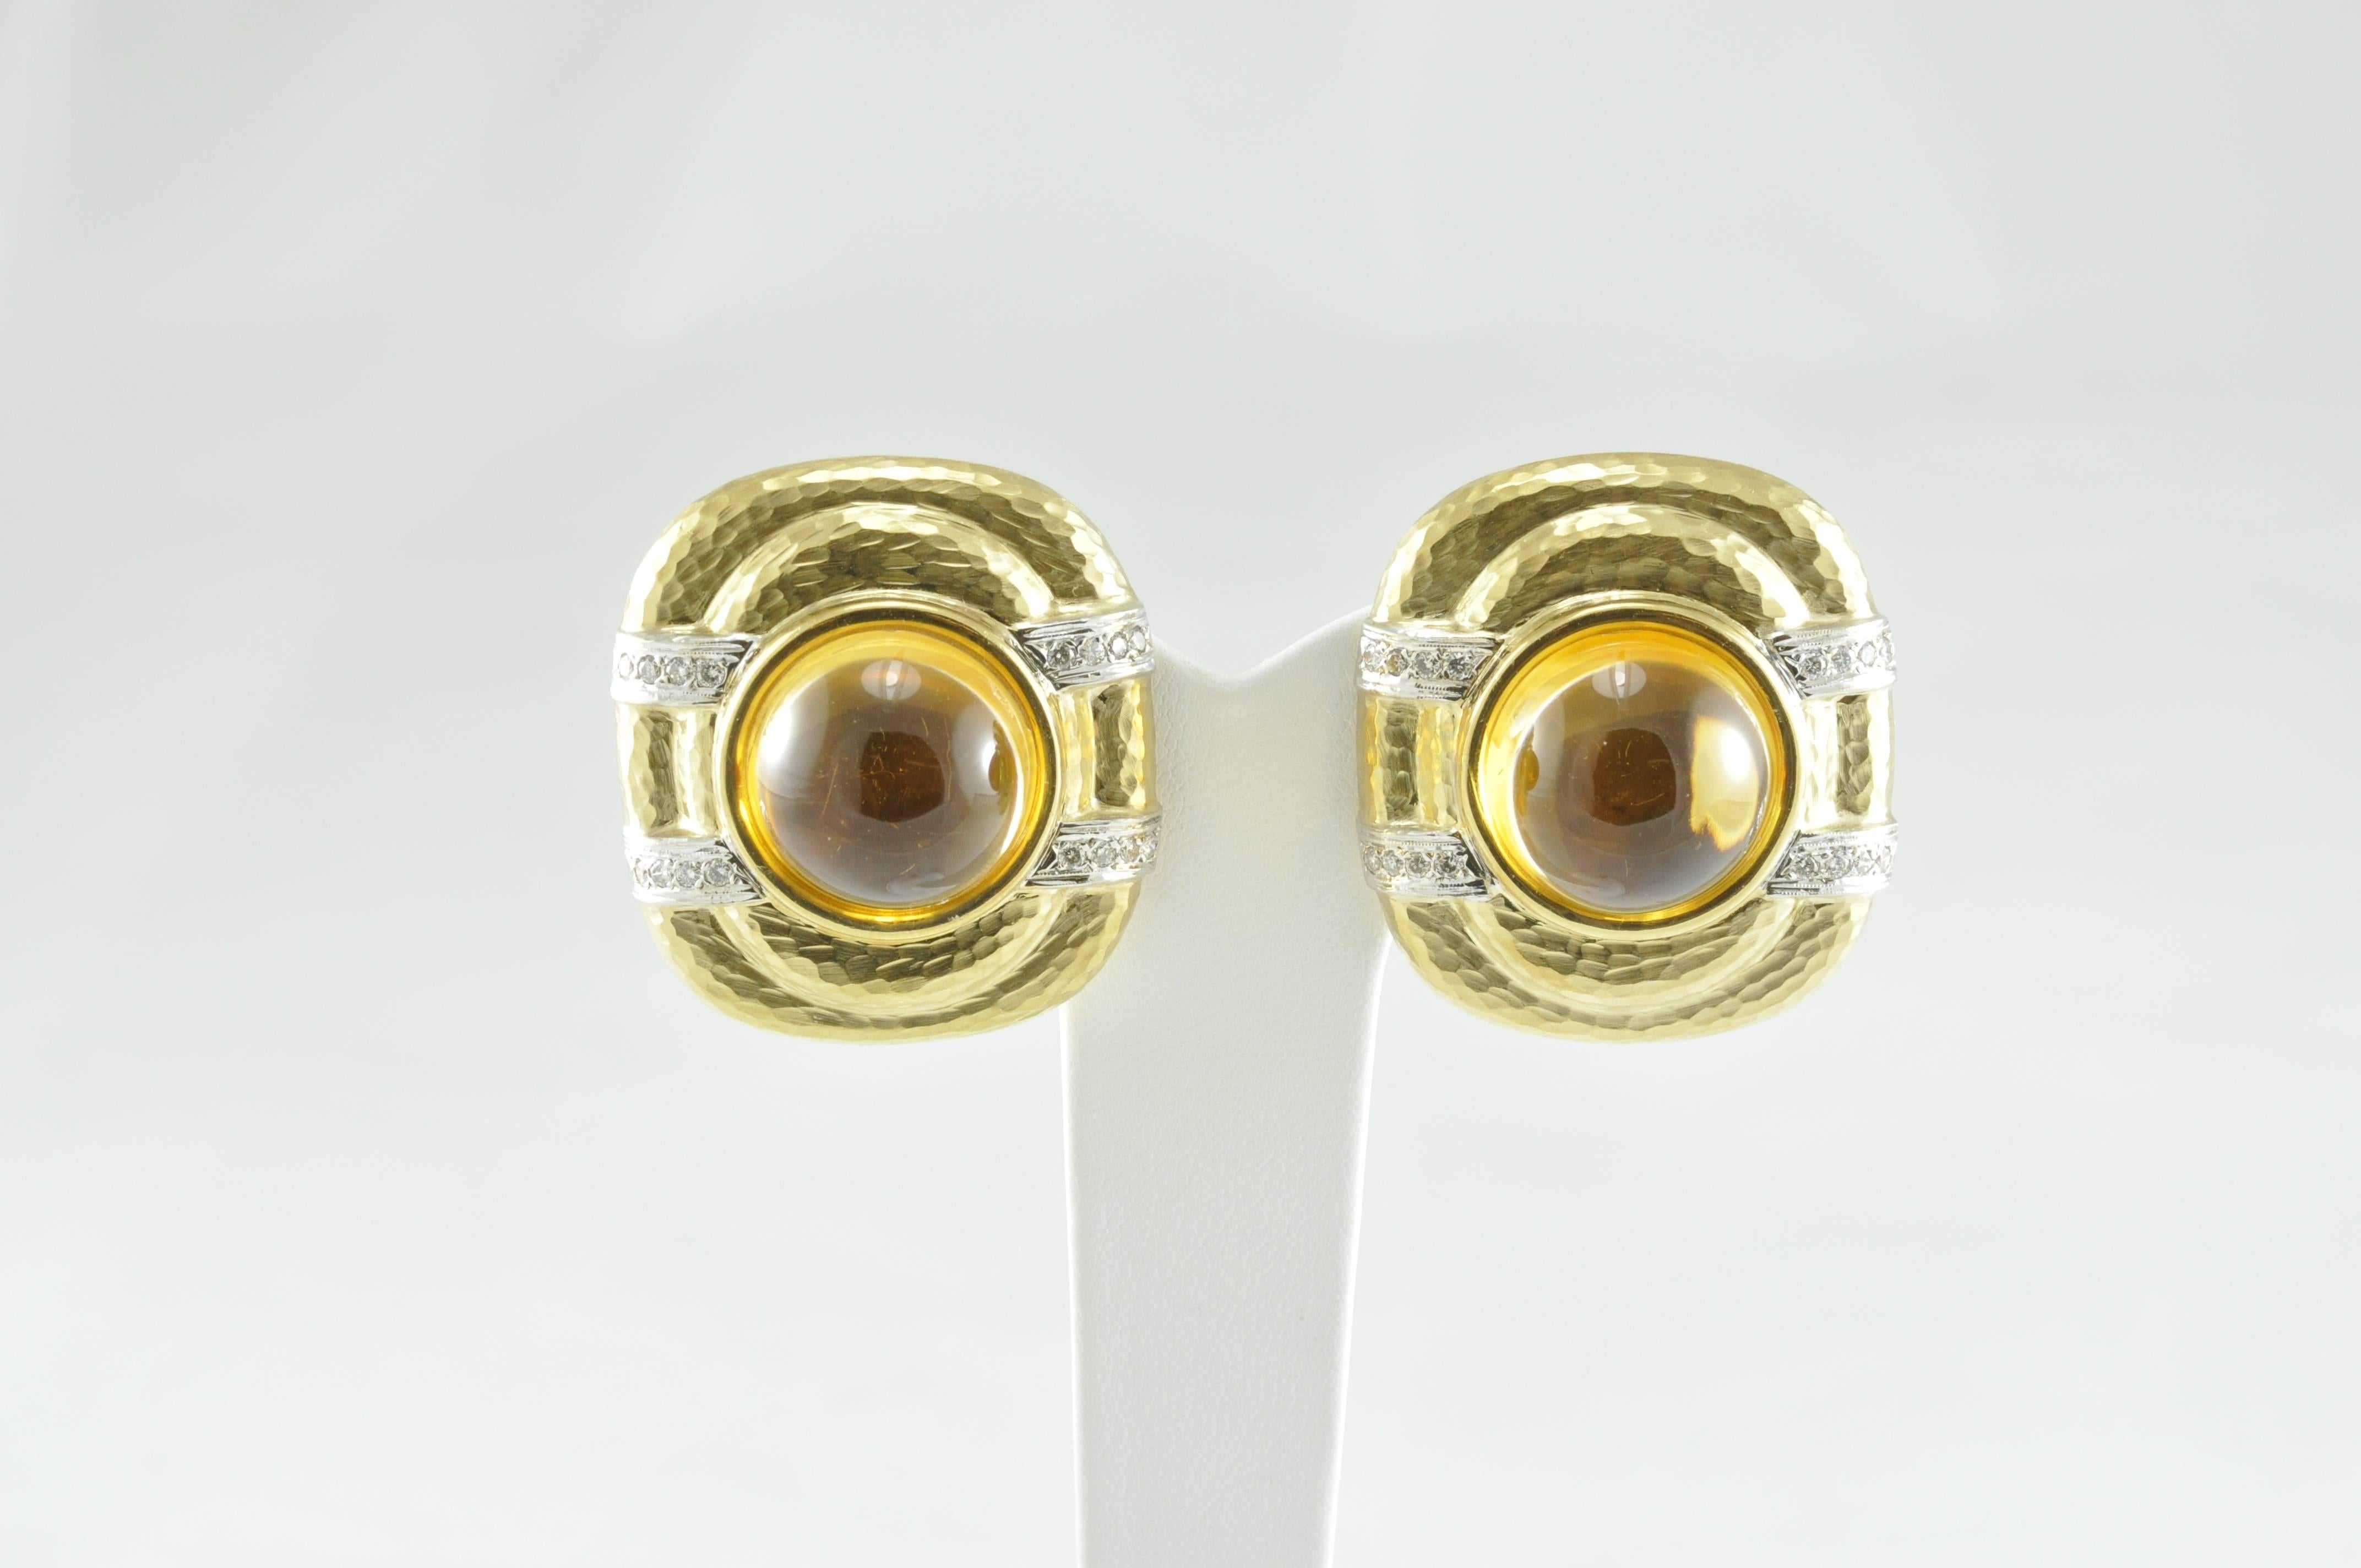 18k Yellow Gold Oval Citrine earrings with 16 diamonds (4 rows of 4) each. Earrings are stamped 18k, as well as ANF.

Clip Earrings.  .80cts Diamonds.  